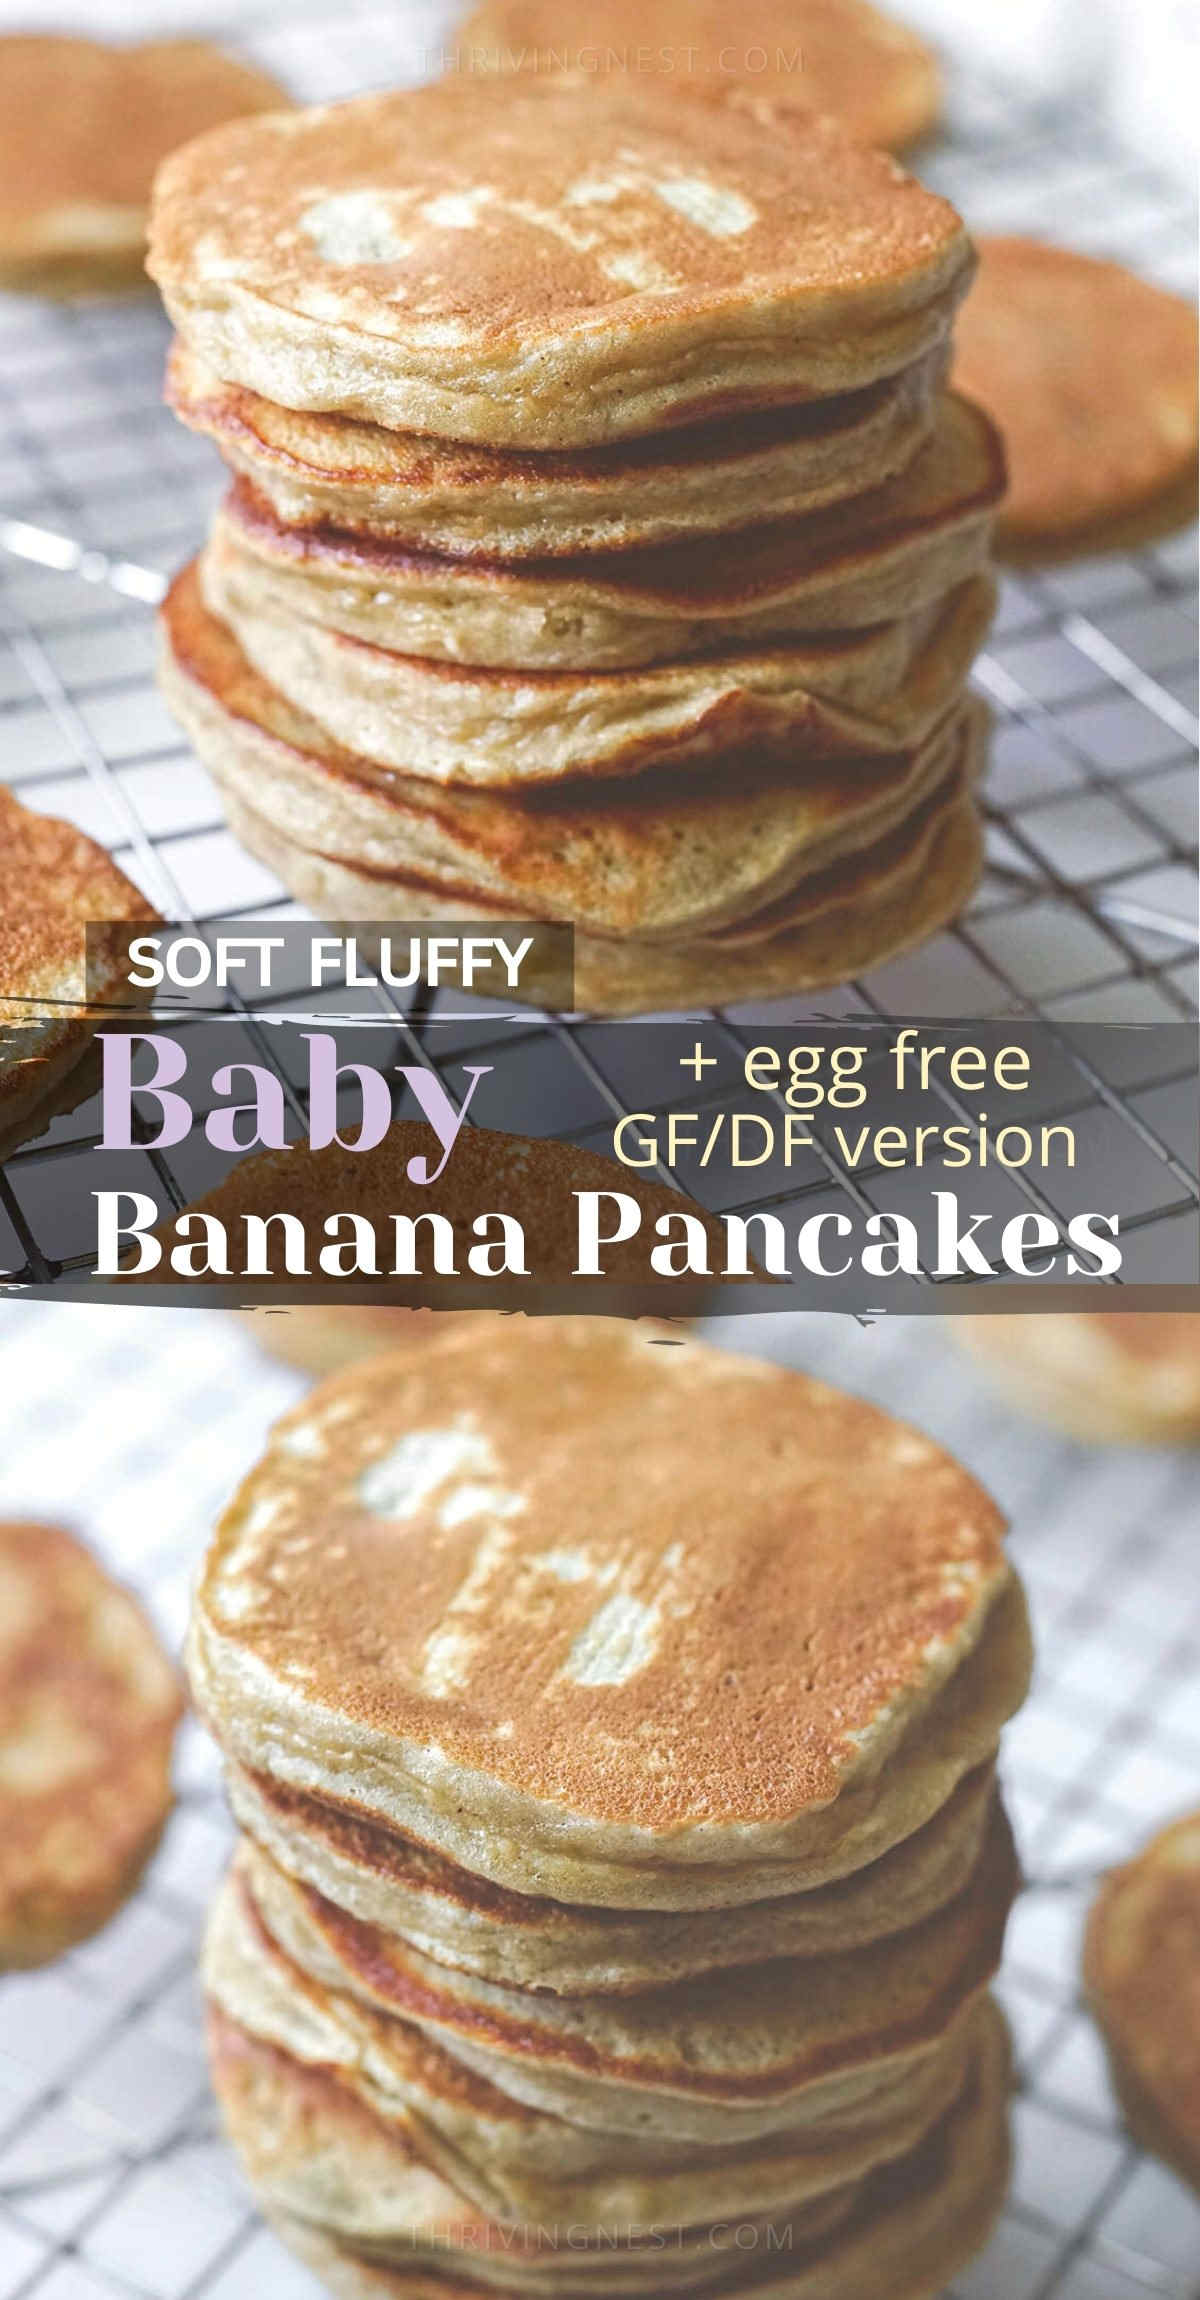 Healthy baby banana pancakes packed with mashed bananas – soft, fluffy and easy to make. These banana pancakes make a great breakfast for babies 6 months and up, baby-led weaning, toddlers and older kids. This baby banana pancake recipe needs no added sugar and can be tweaked to be egg free, dairy free, grain free and vegan. #babypancakes #babyfood #babyledweaning #bananapancakes #babybreakfast #eggfree